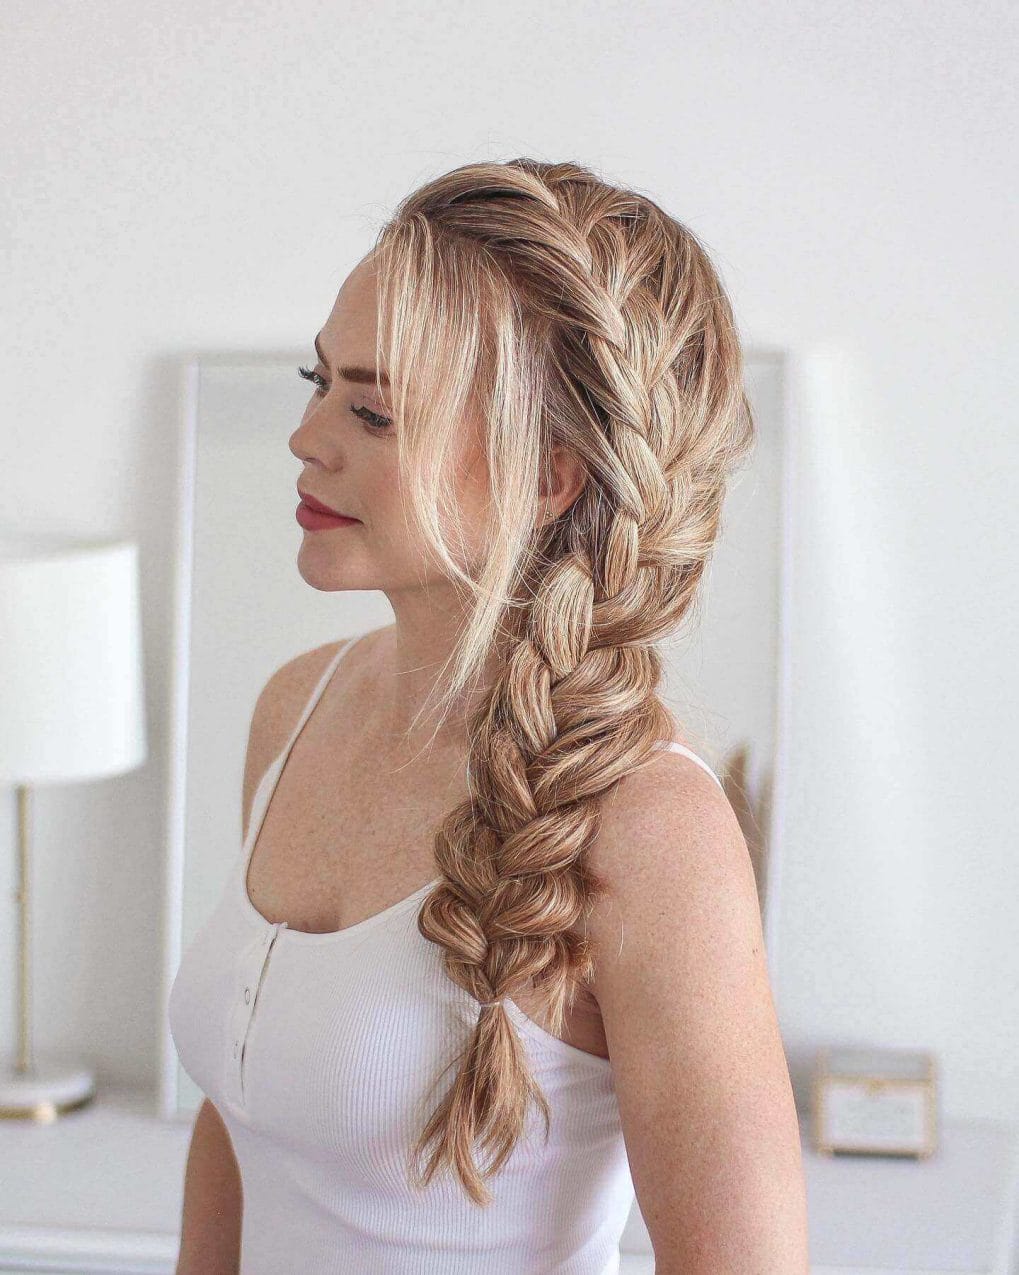 Effortlessly romantic, loose French braid with warm blonde layers.